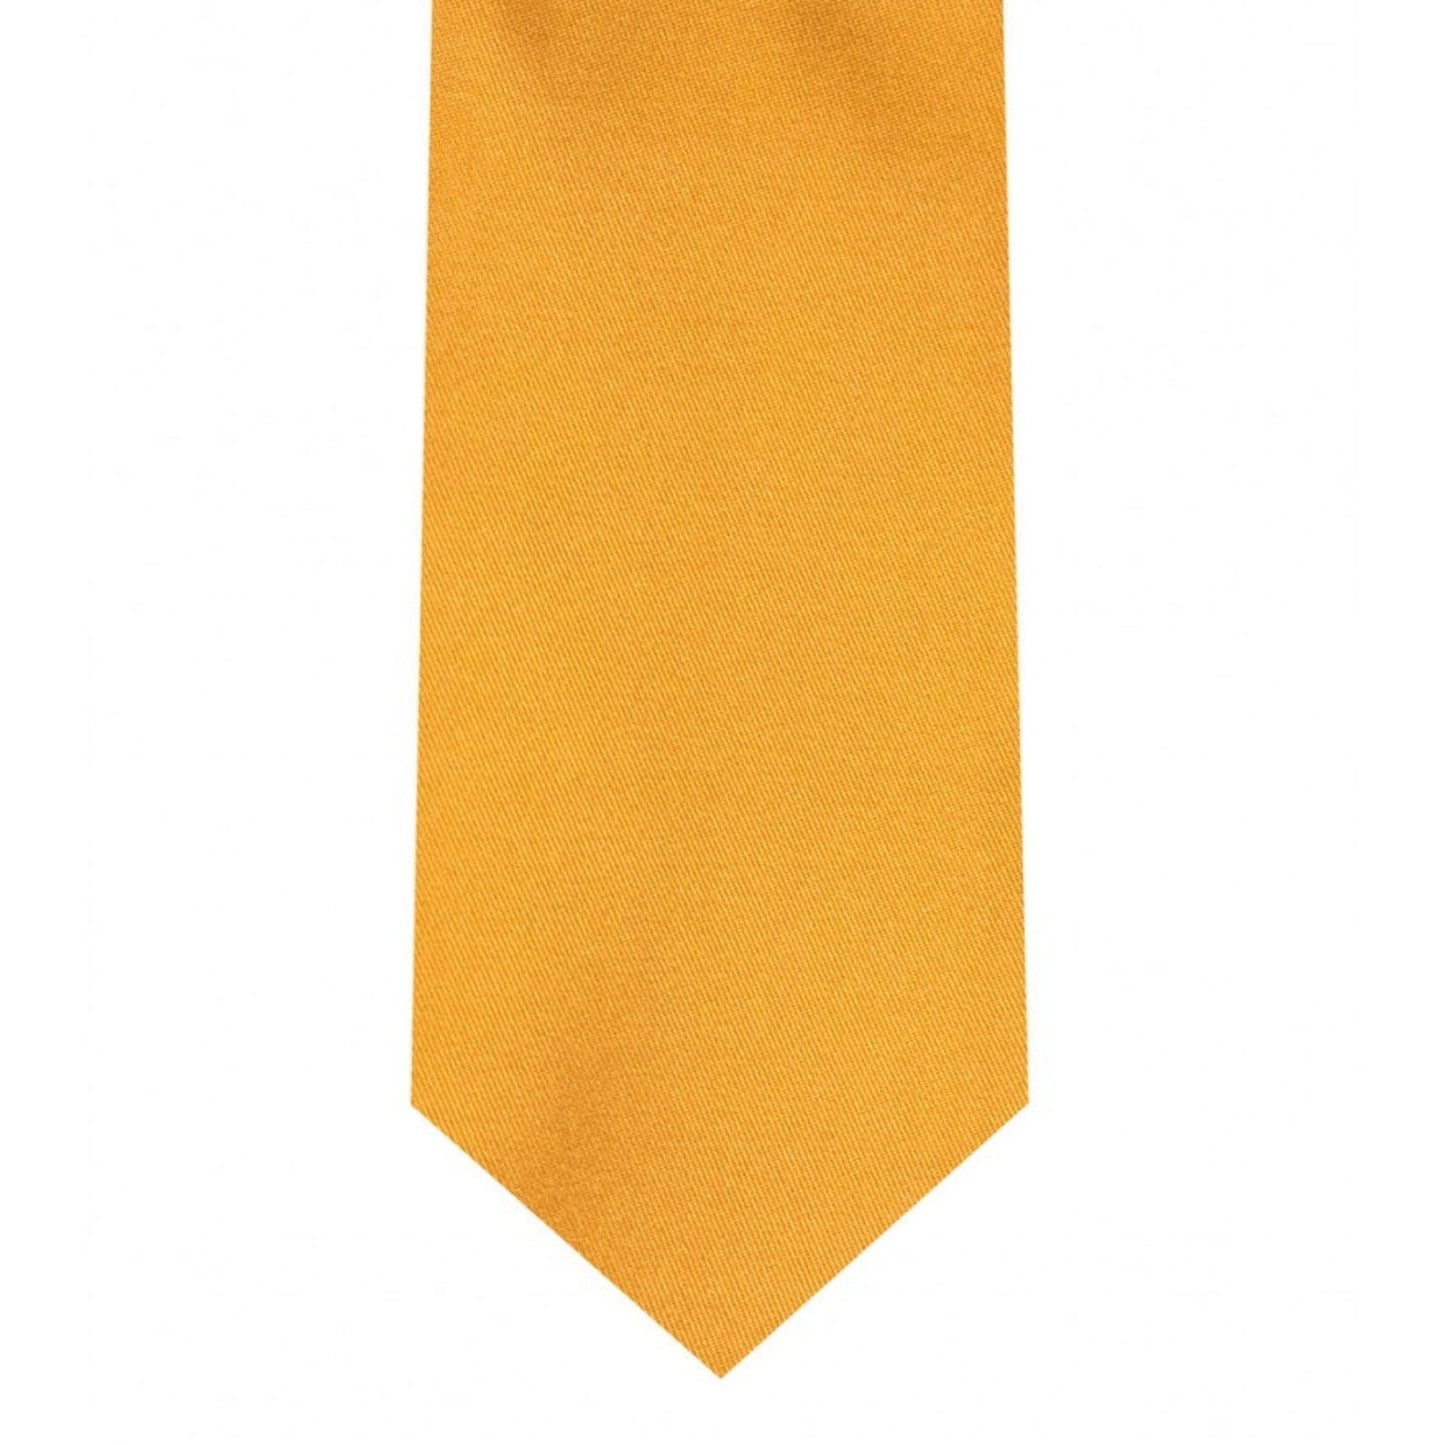 Classic Orange Tie Skinny width 2.75 inches With Matching Pocket Square | KCT Menswear 